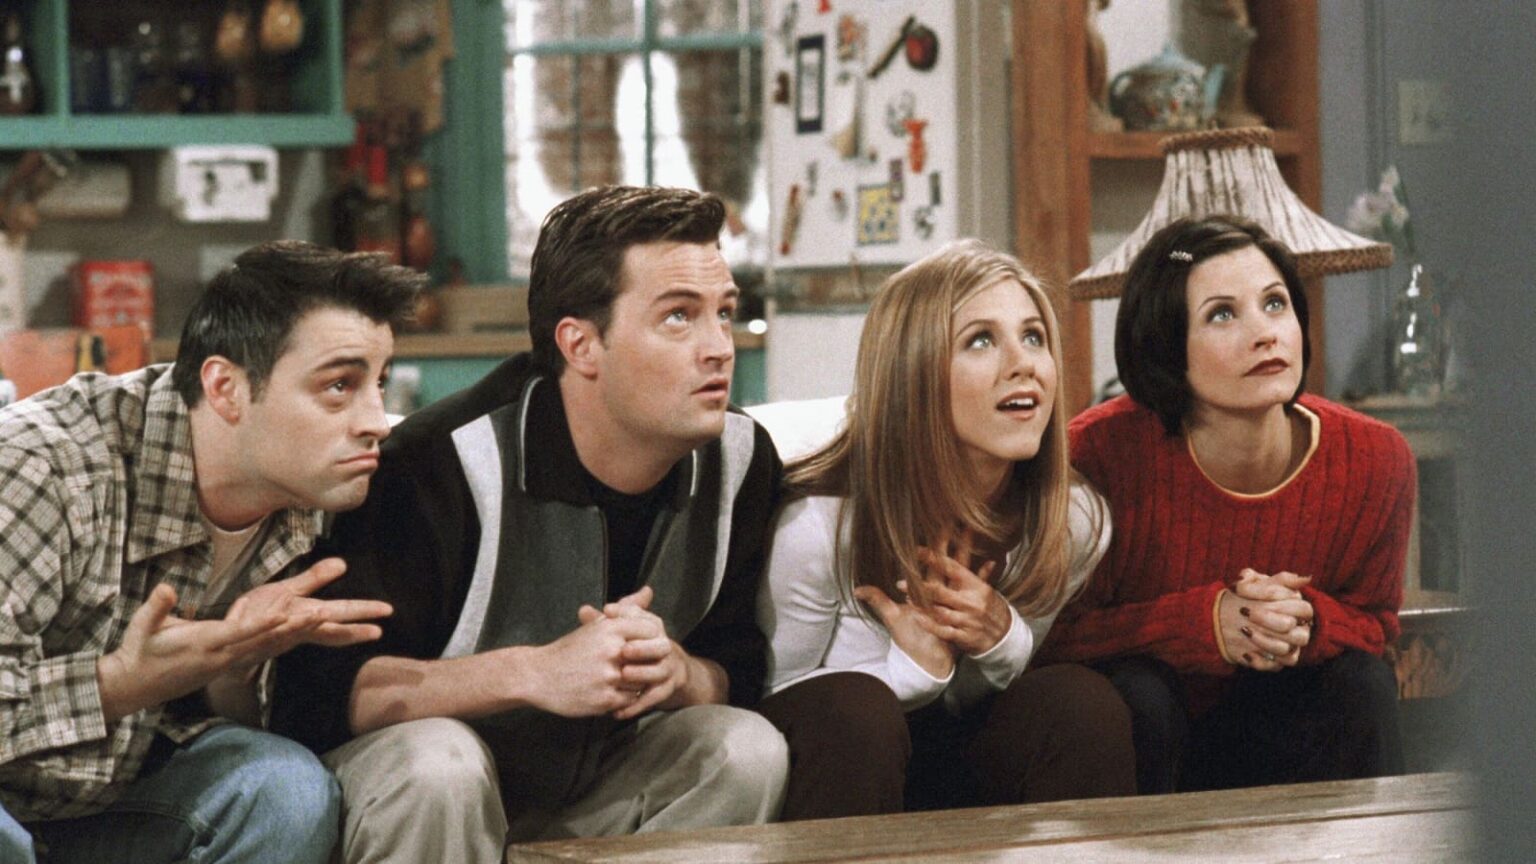 They’ll be there for you like they’ve been there before! Here's the HBO Max's 'Friends' reunion special sneak peek.